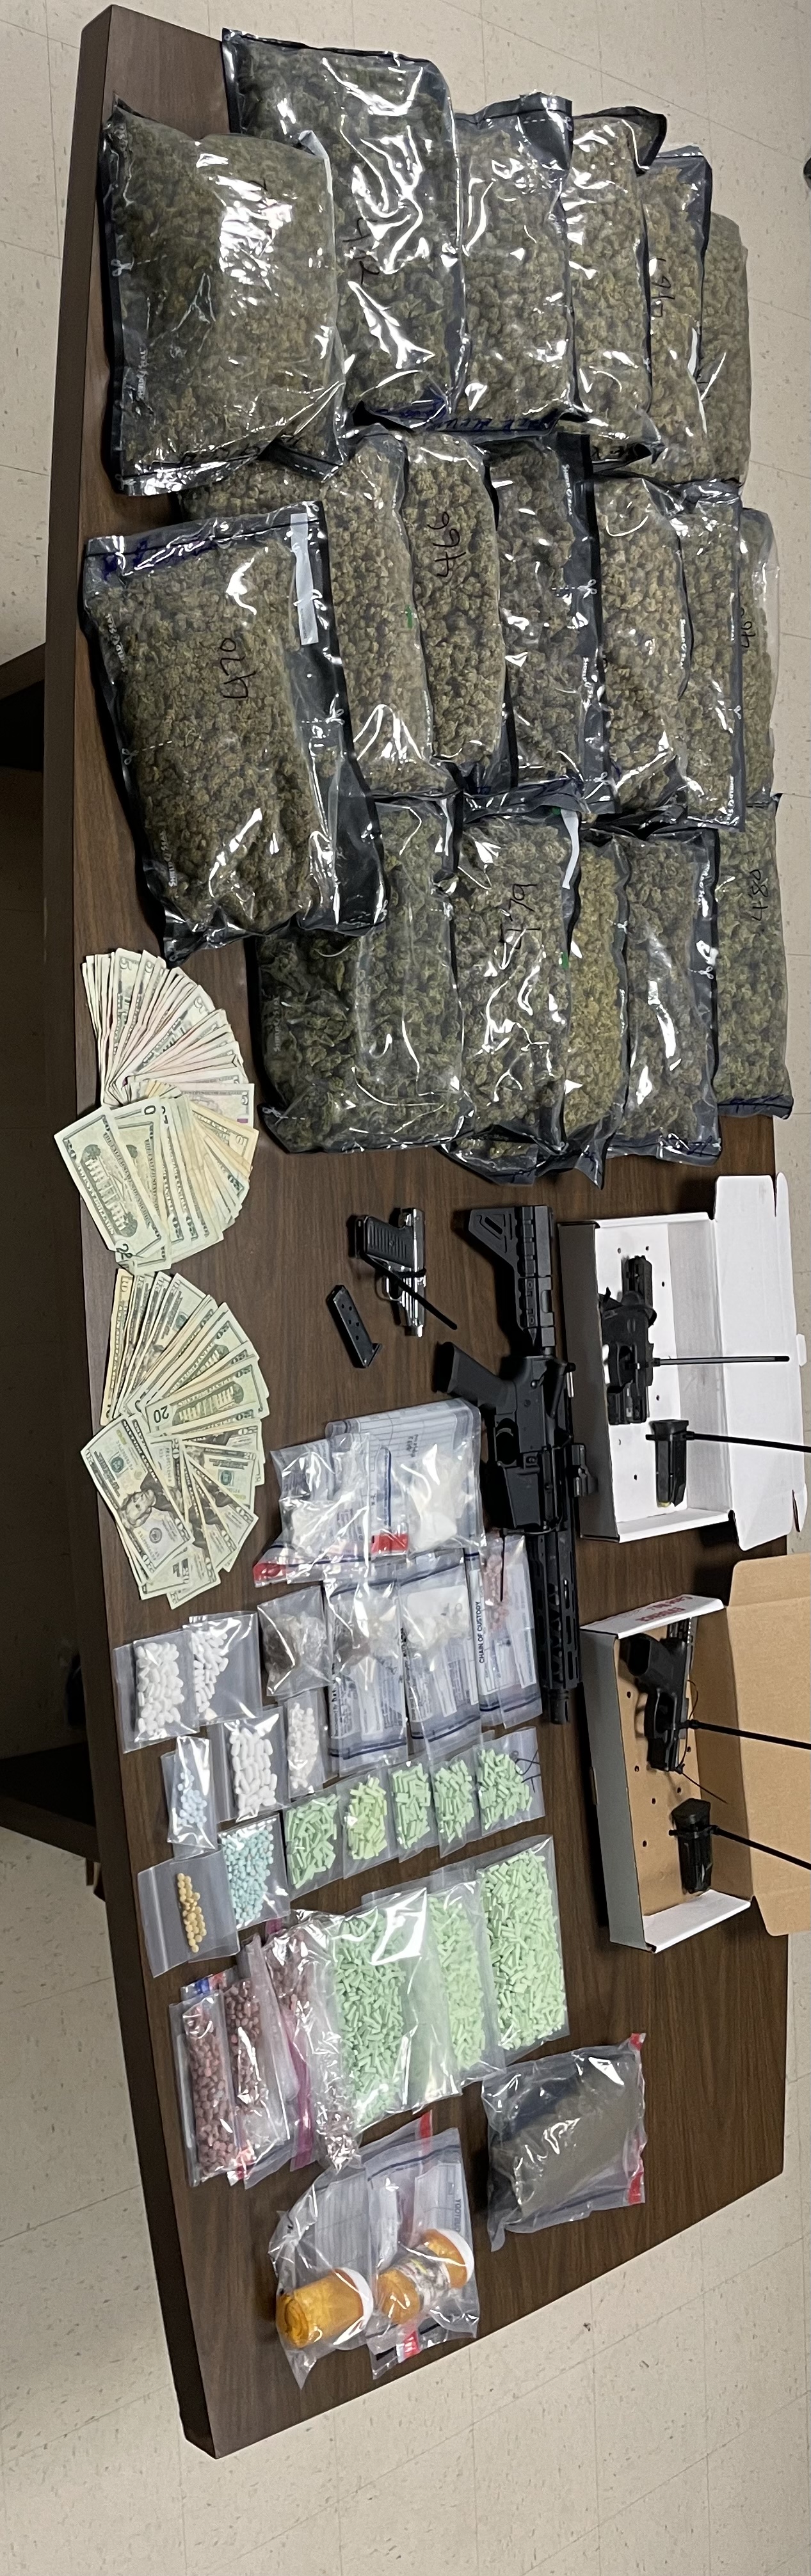 Drugs And Weapons Recovered In Early-Morning Raid Of Apartment With Kids Inside, Across From DeLand Middle School Image